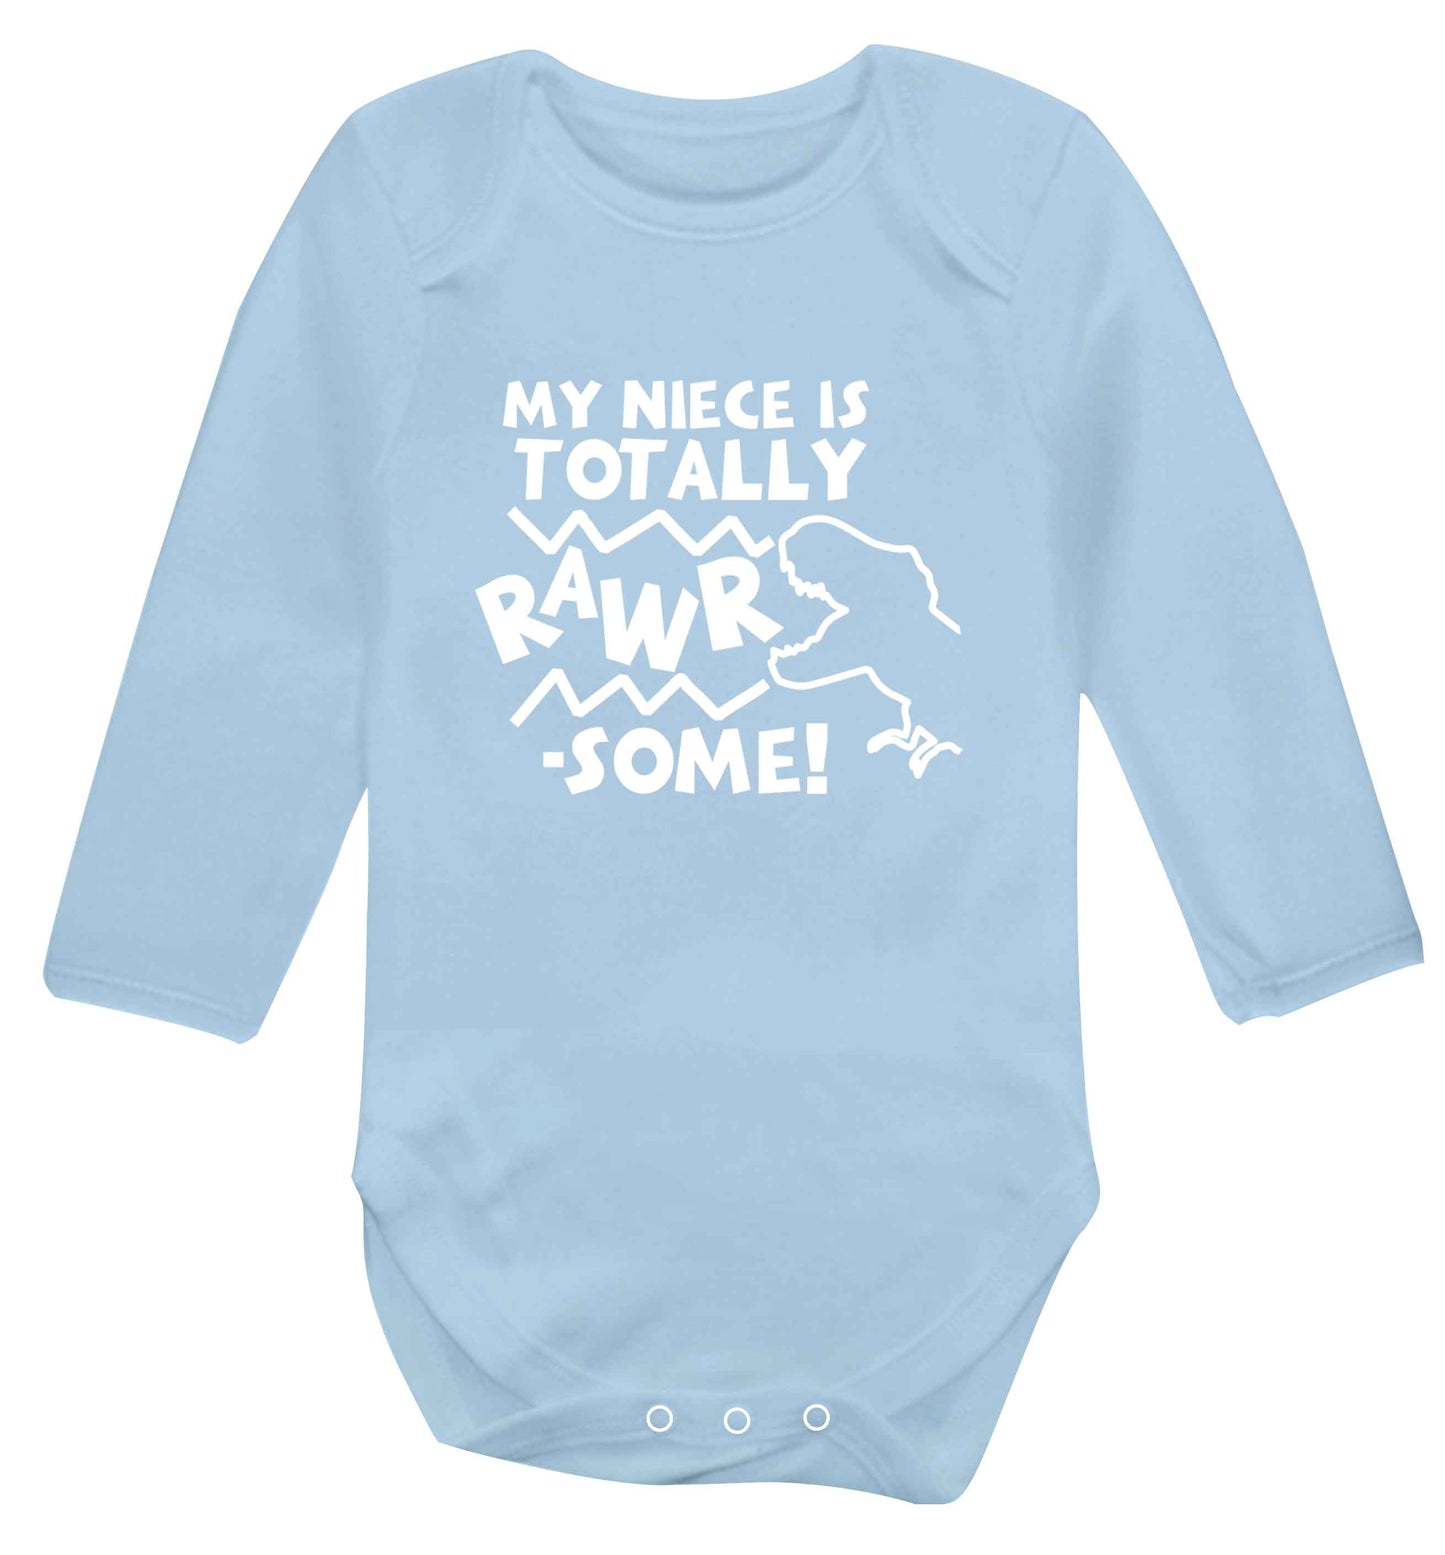 My niece is totally rawrsome baby vest long sleeved pale blue 6-12 months